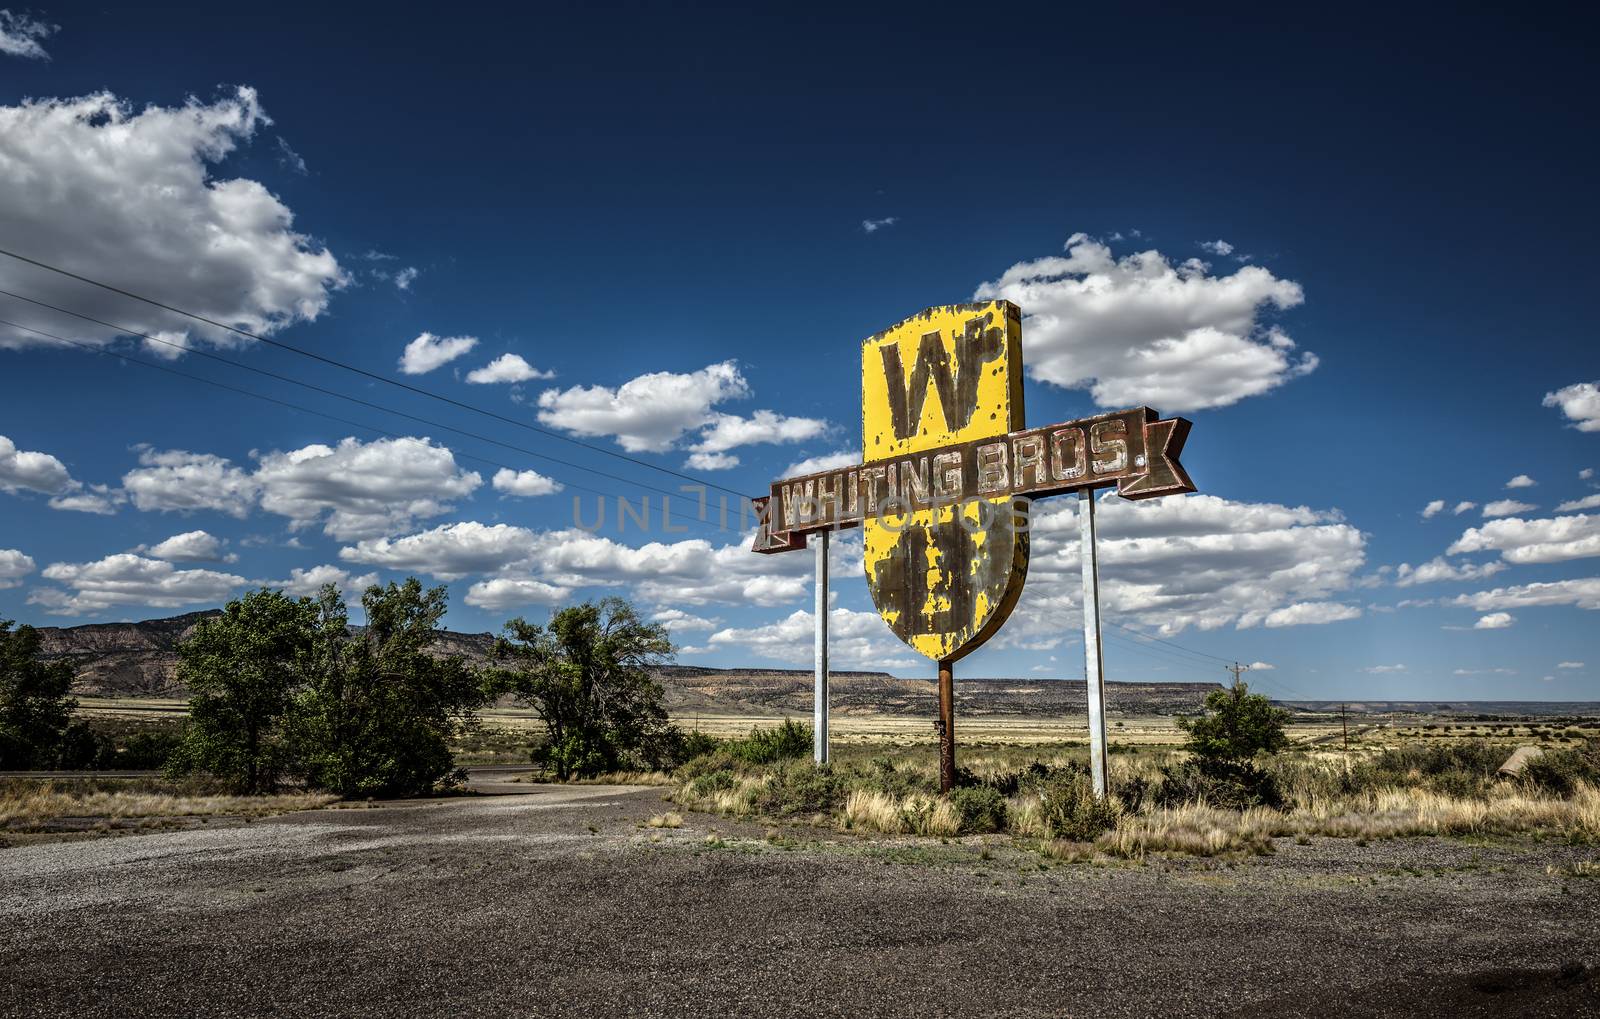 Vintage Whiting Bros. sign in New Mexico by nickfox